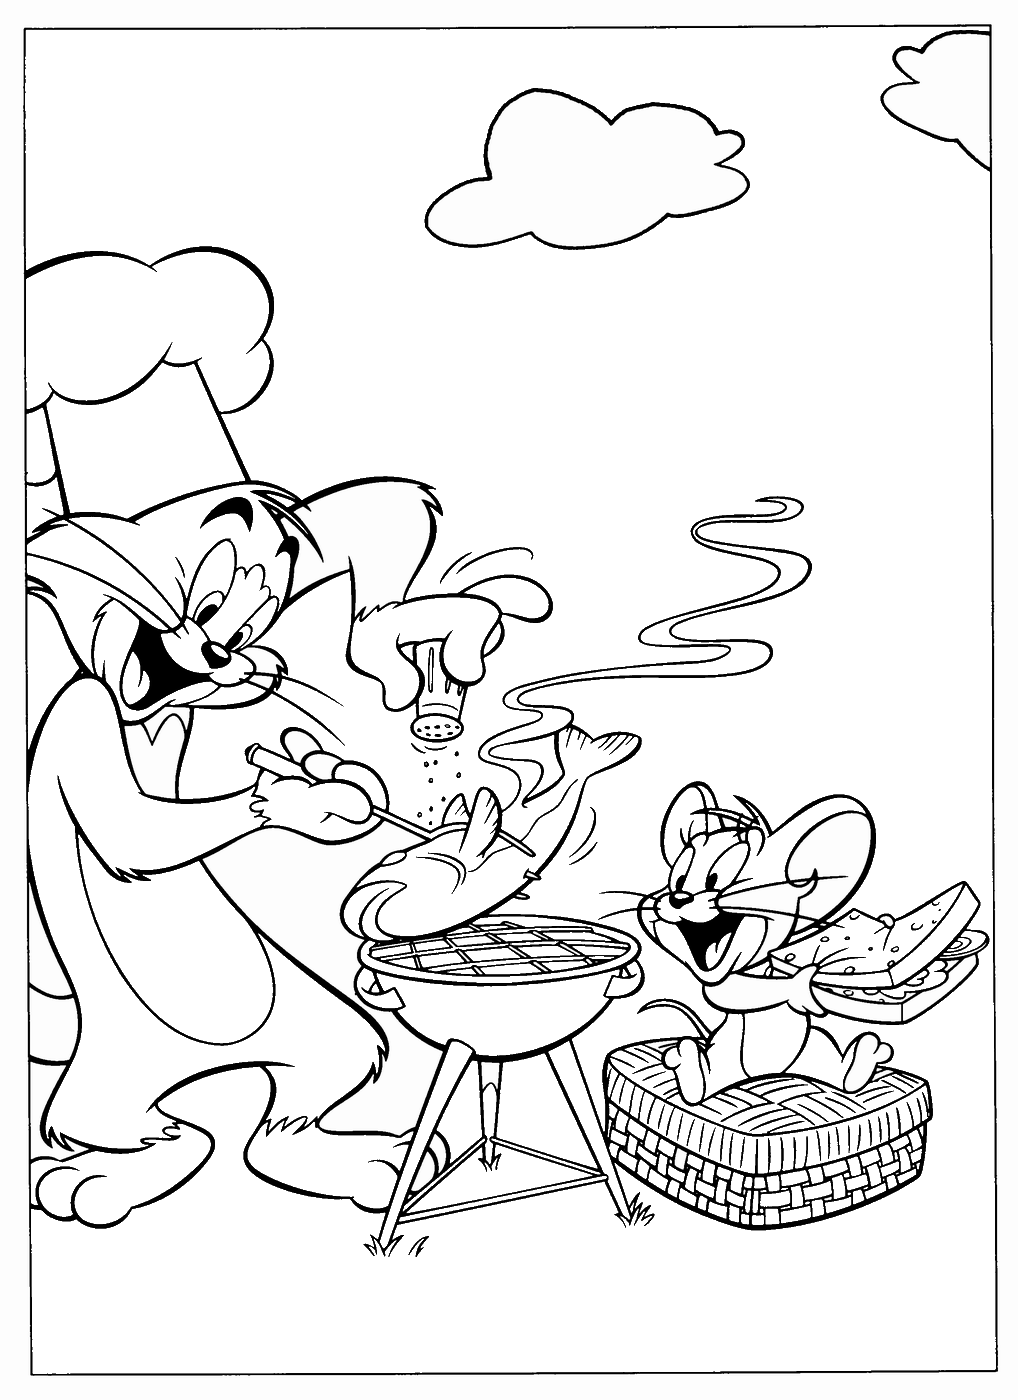 Tom and Jerry Coloring Pages TV Film tom_jerry_cl_22 Printable 2020 10152 Coloring4free